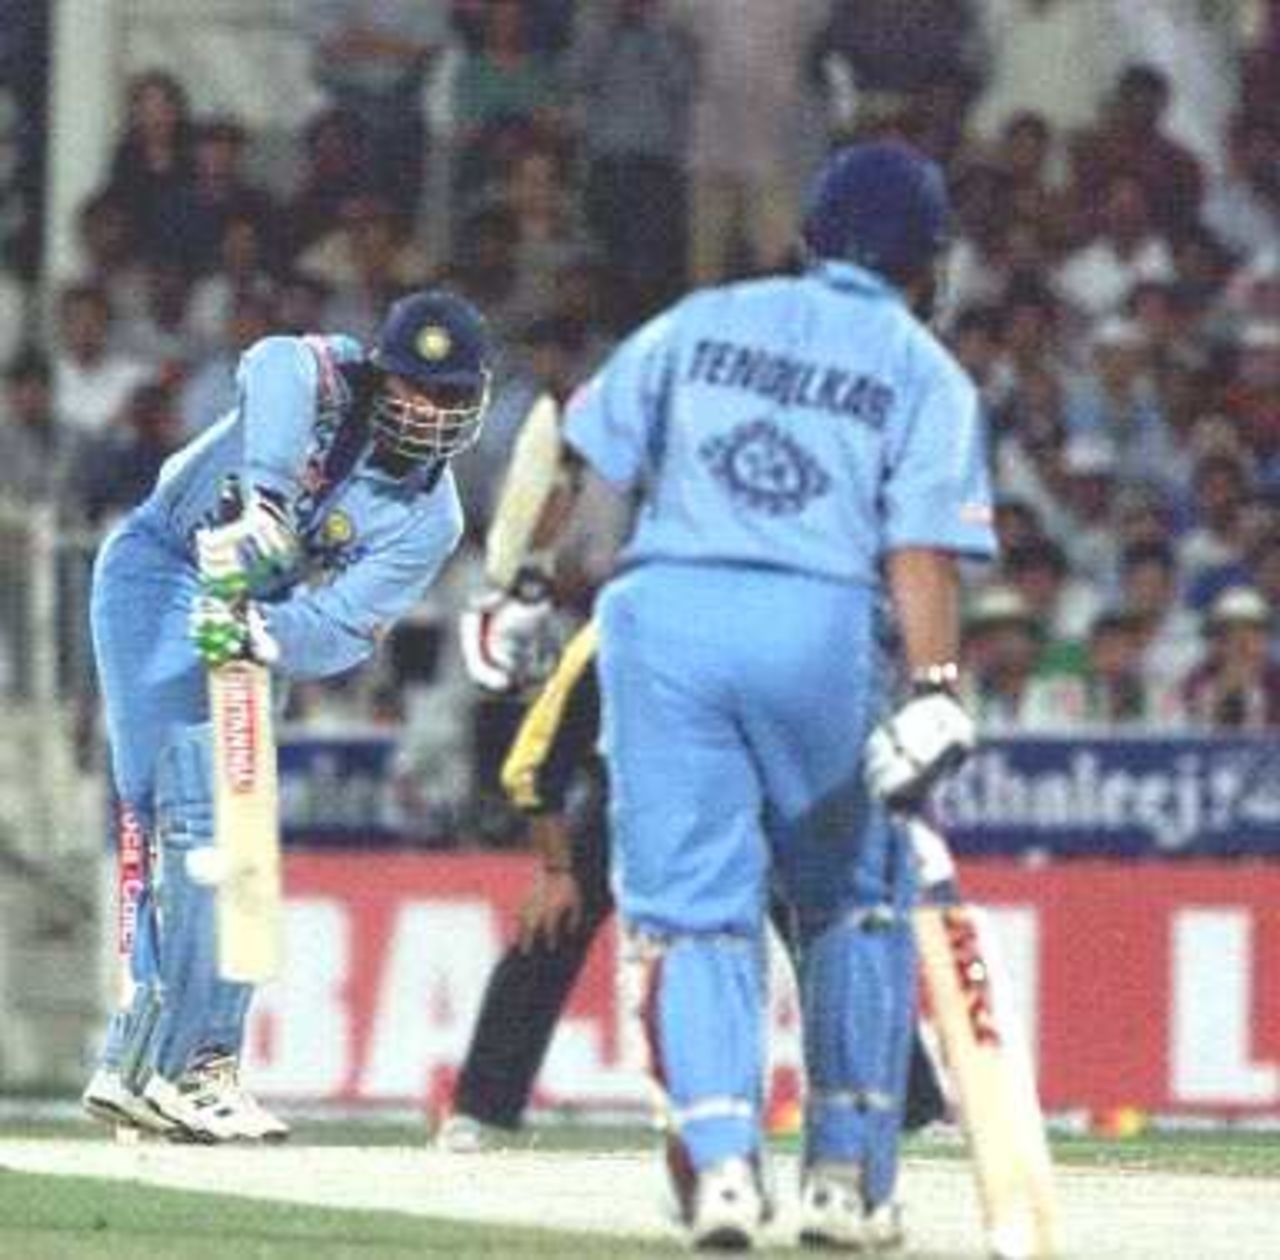 Indian captain Saurav Ganguly (L) in action, as his partner Sachin Tendulkar (R) watches on, during the Champions Cup international at the Sharjah cricket stadium 23 March 2000.